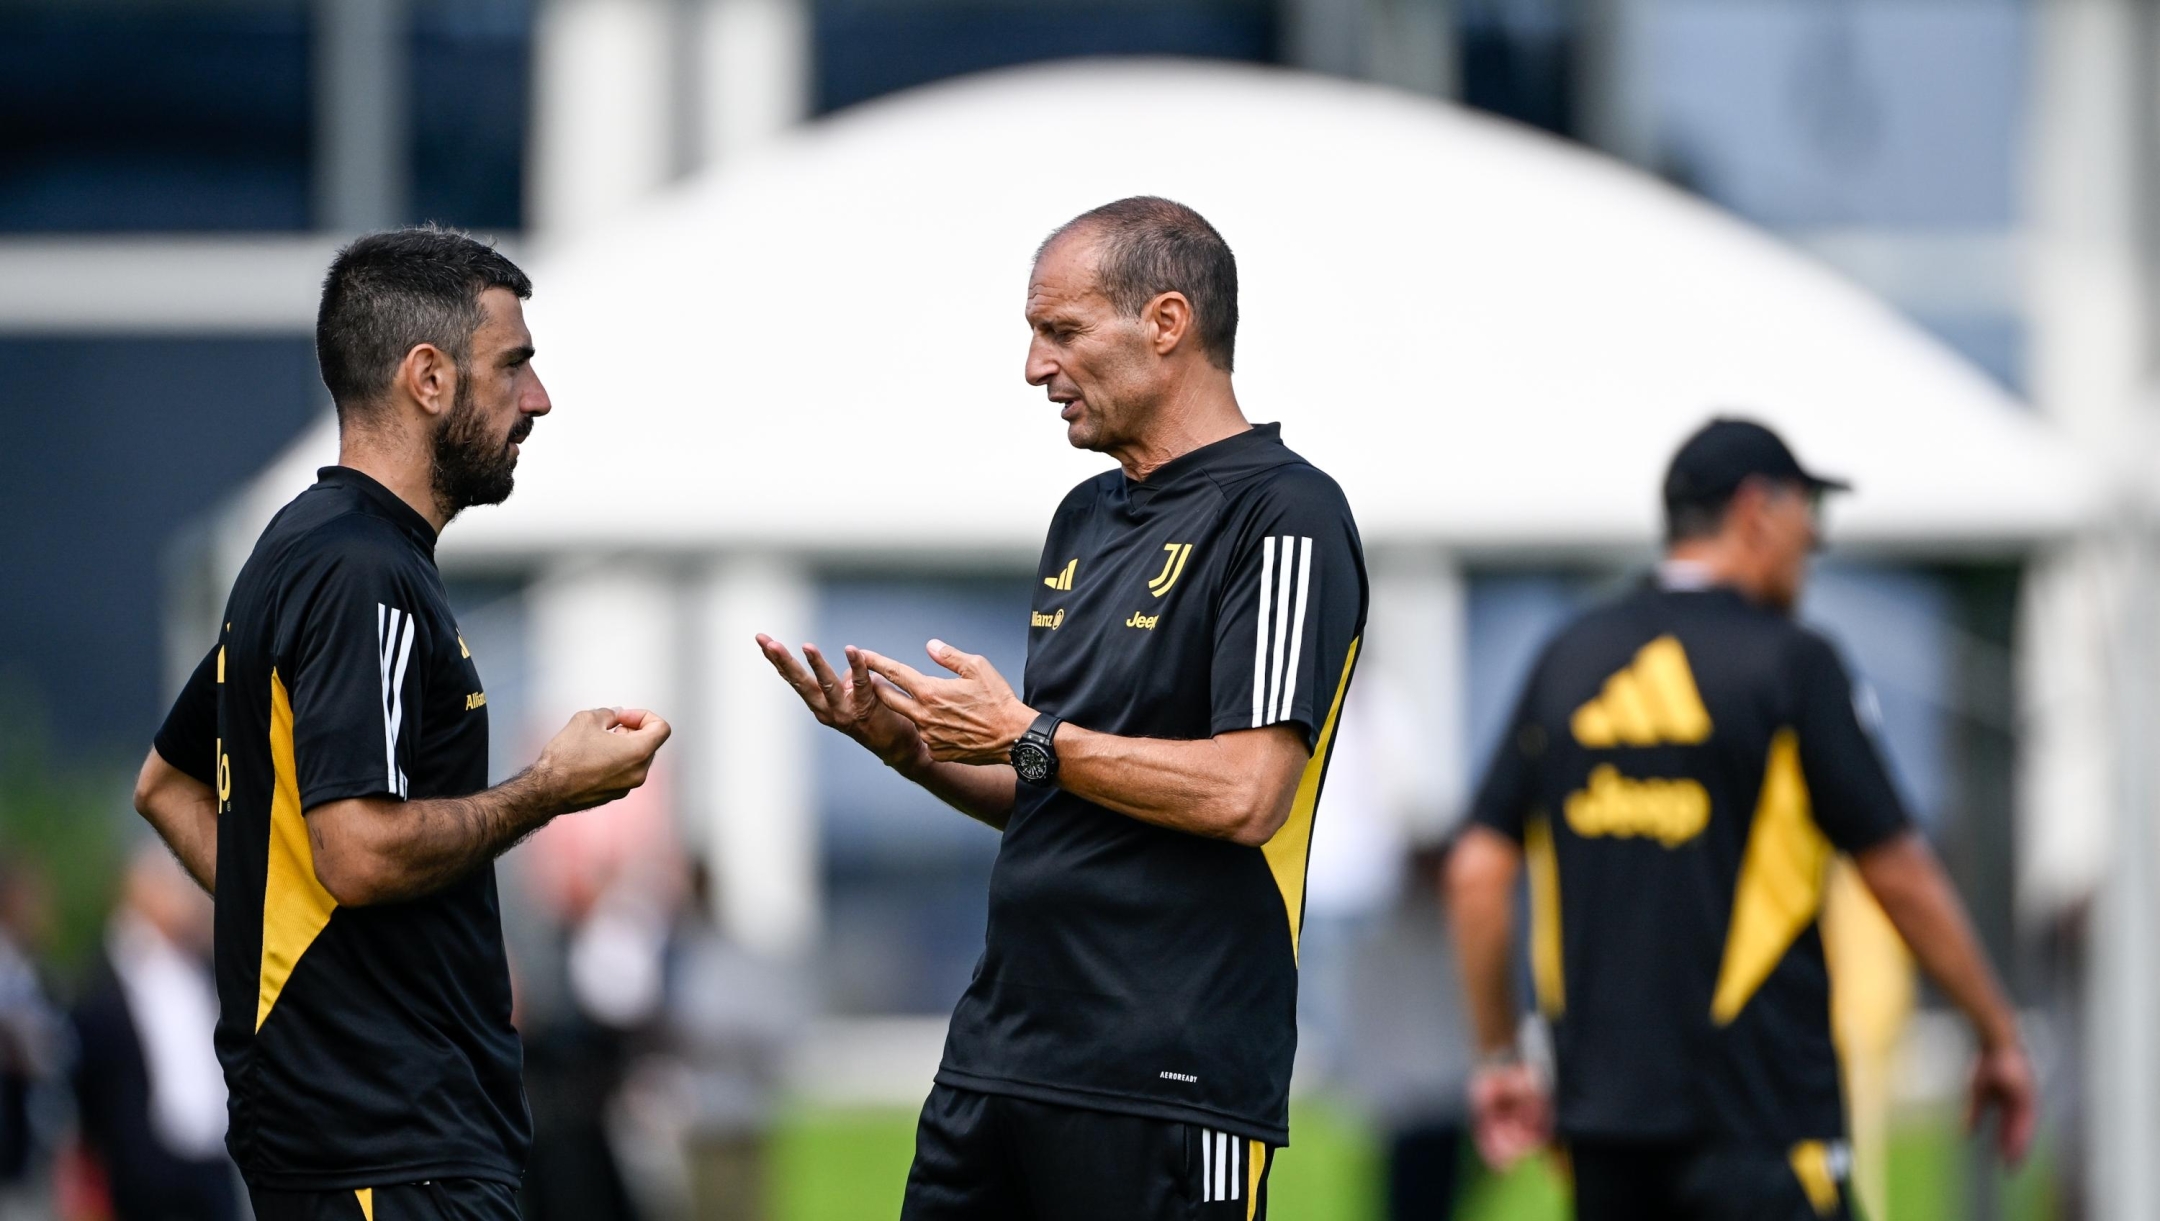 TURIN, ITALY - JULY 15: Francesco Magnanelli, Massimiliano Allegri of Juventus during a training session at JTC on July 15, 2023 in Turin, Italy. (Photo by Daniele Badolato - Juventus FC/Juventus FC via Getty Images)